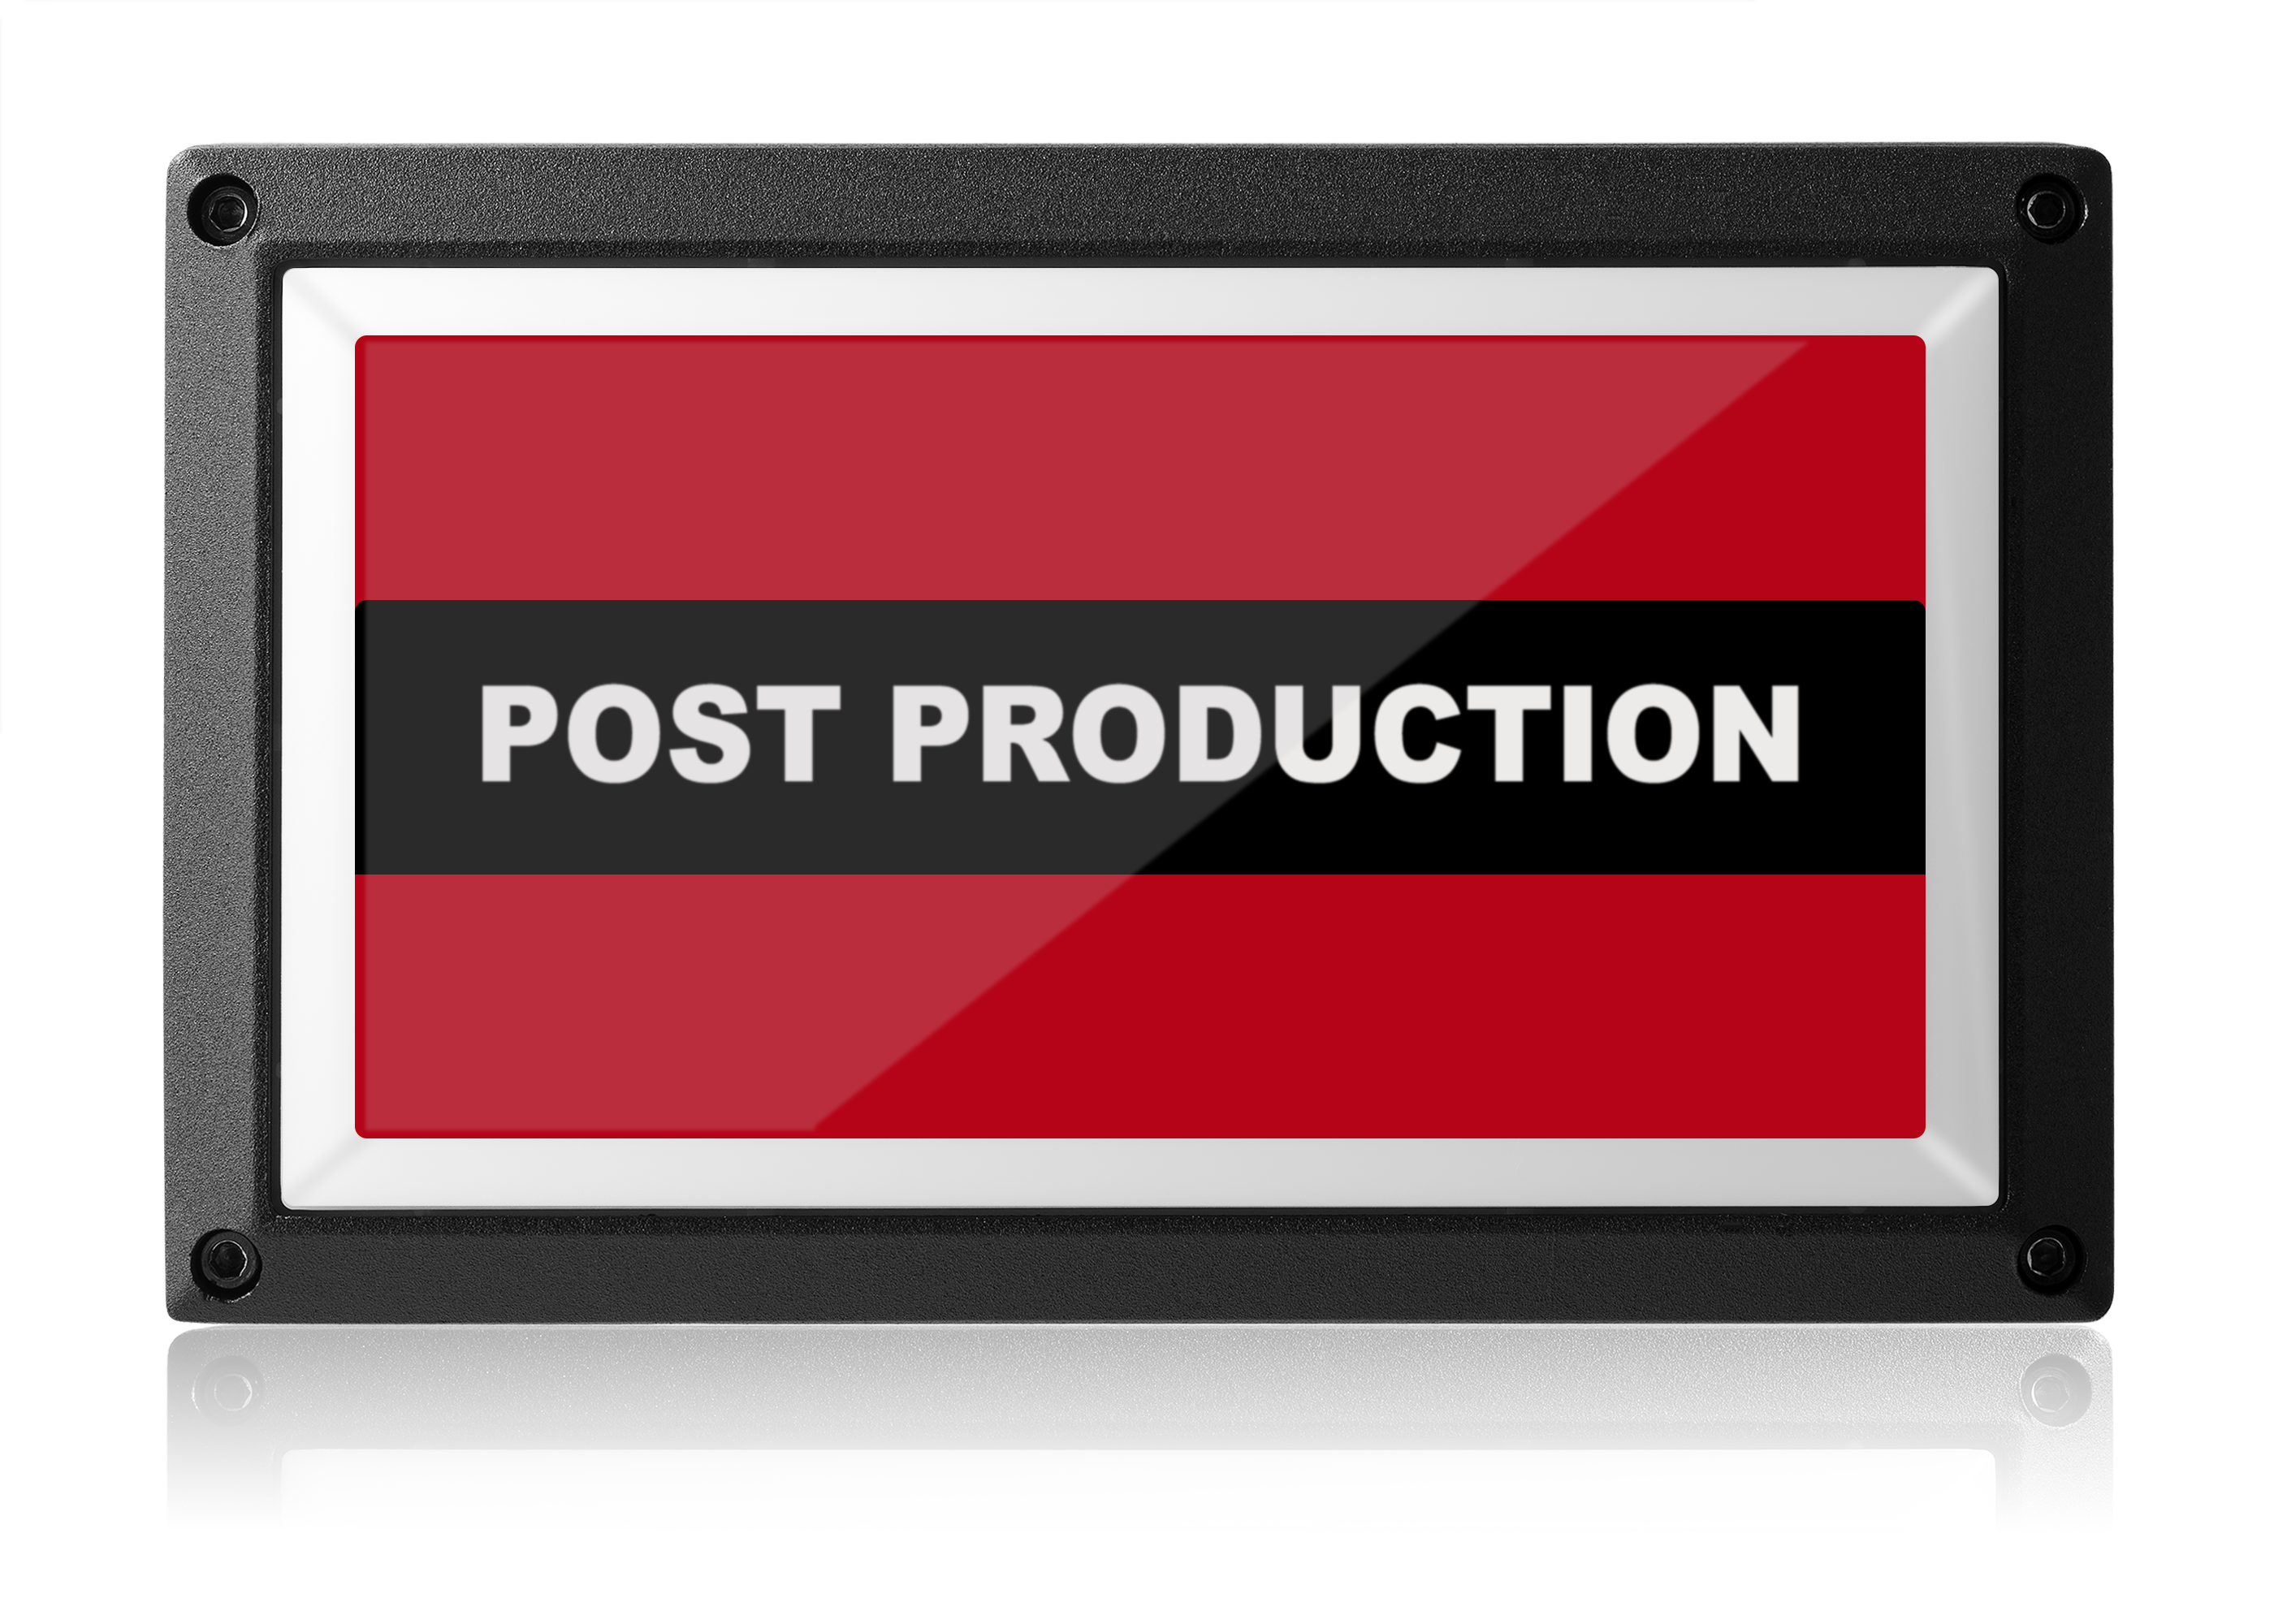 Post Production Room Light - Red ISO - Rekall Dynamics LED Sign-Red-Low Voltage (12-24v DC)-